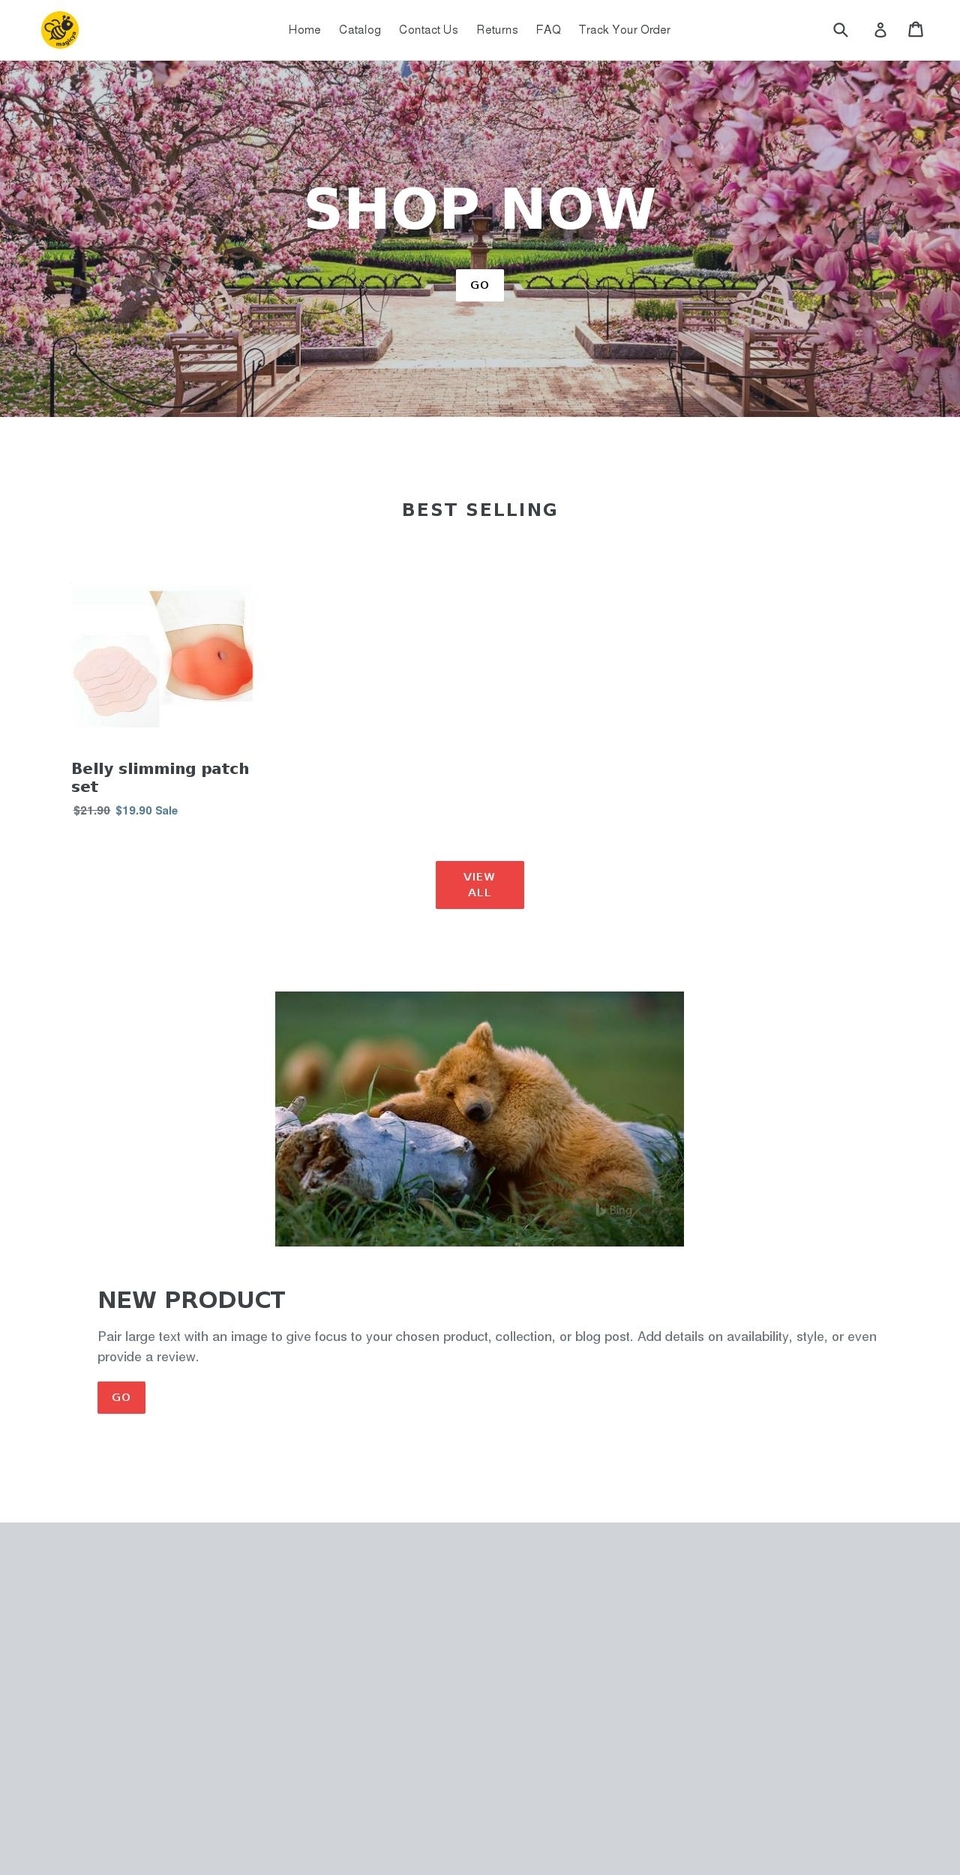 Spring Shopify theme site example magicya.com